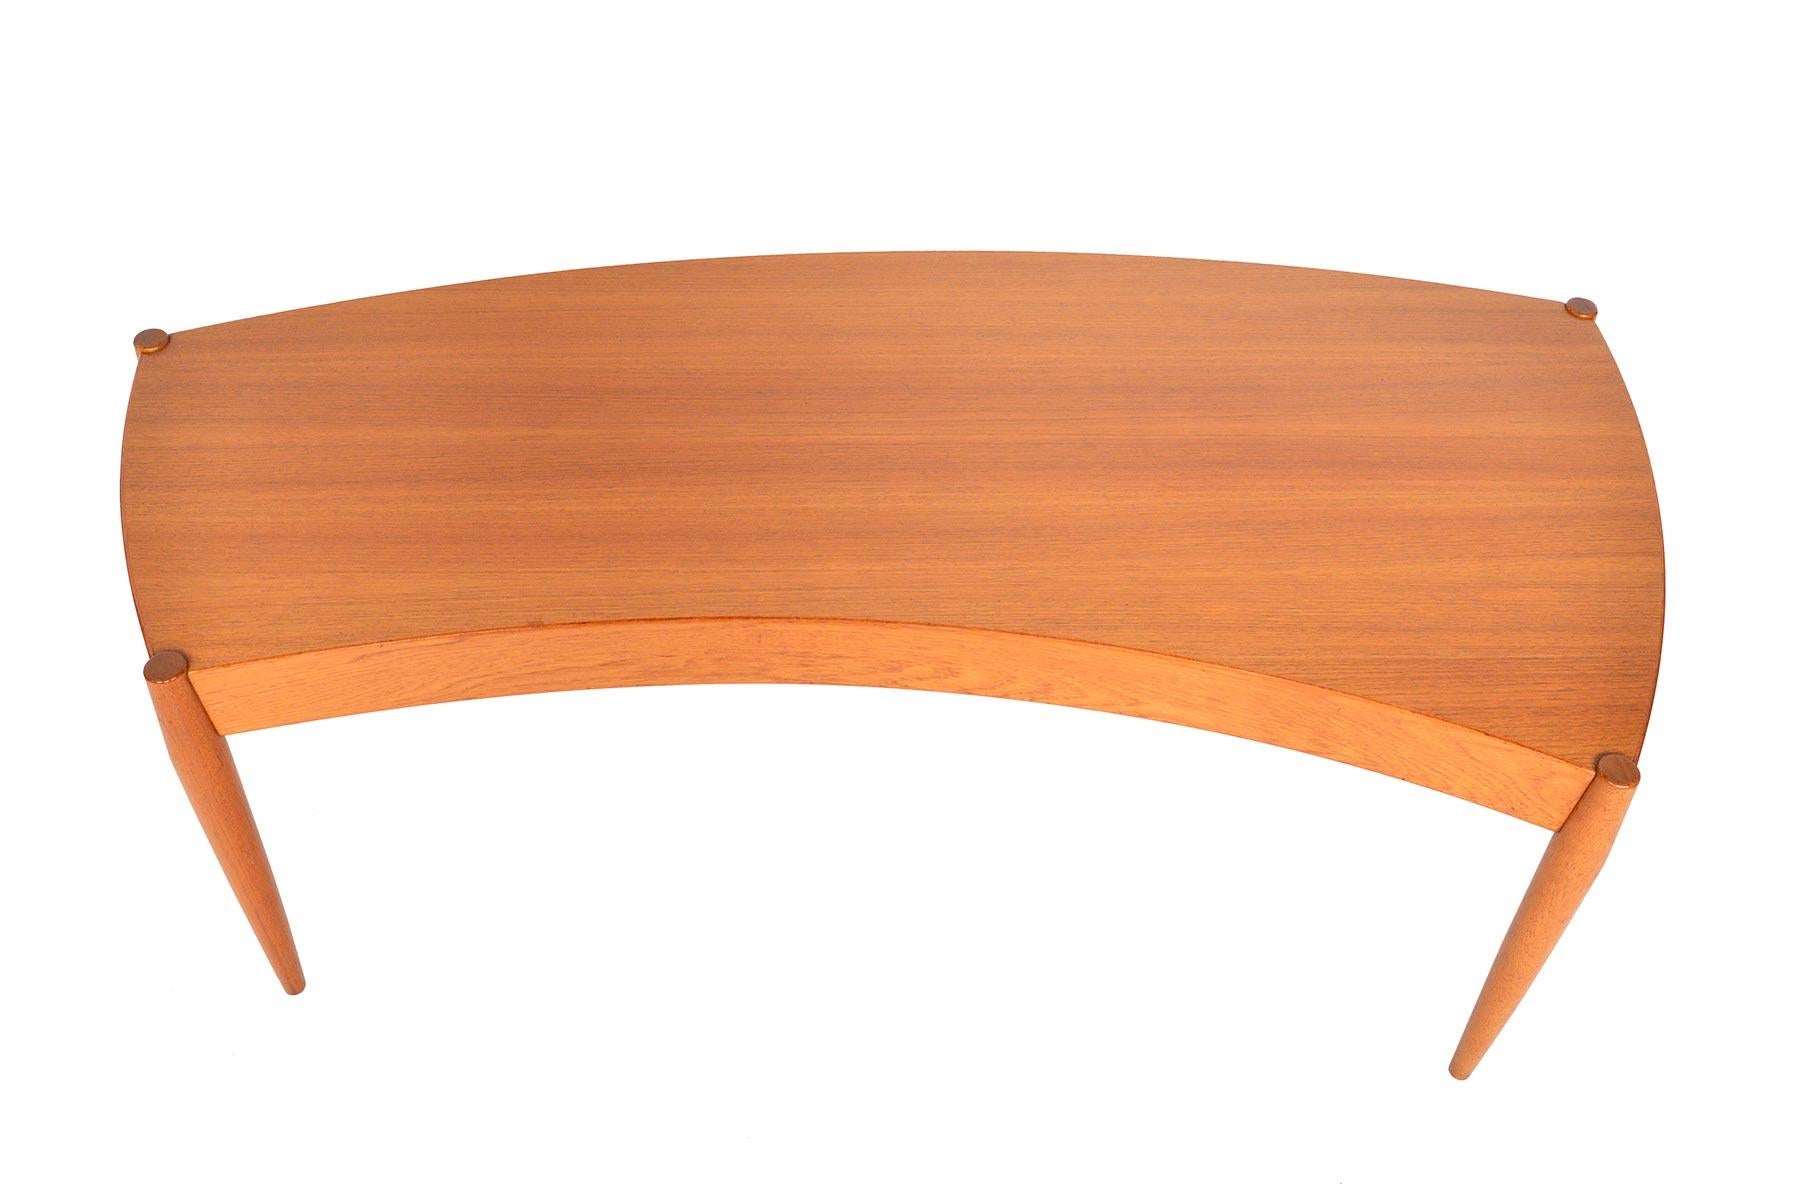 This Danish modern midcentury coffee table in teak was designed by Johannes Andersen for Trensum Møbelfabrik in the 1950s. Expertly built, this gorgeous piece features a sweeping curve teak tabletop and four sculpted legs. In excellent original